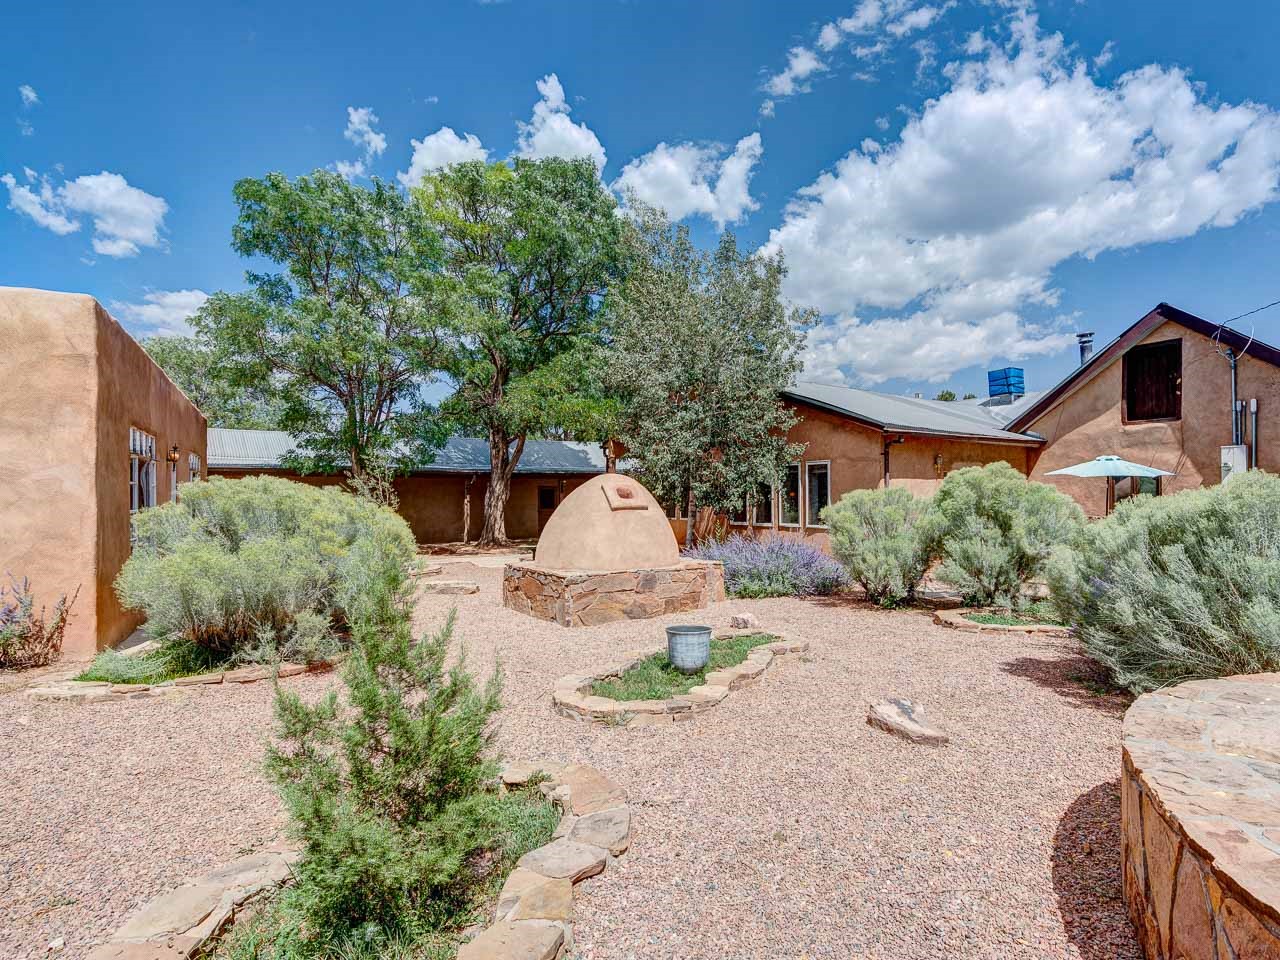 46 CR B41D, San Jose, New Mexico 87565, 5 Bedrooms Bedrooms, ,4 BathroomsBathrooms,Residential,For Sale,46 CR B41D,202232941